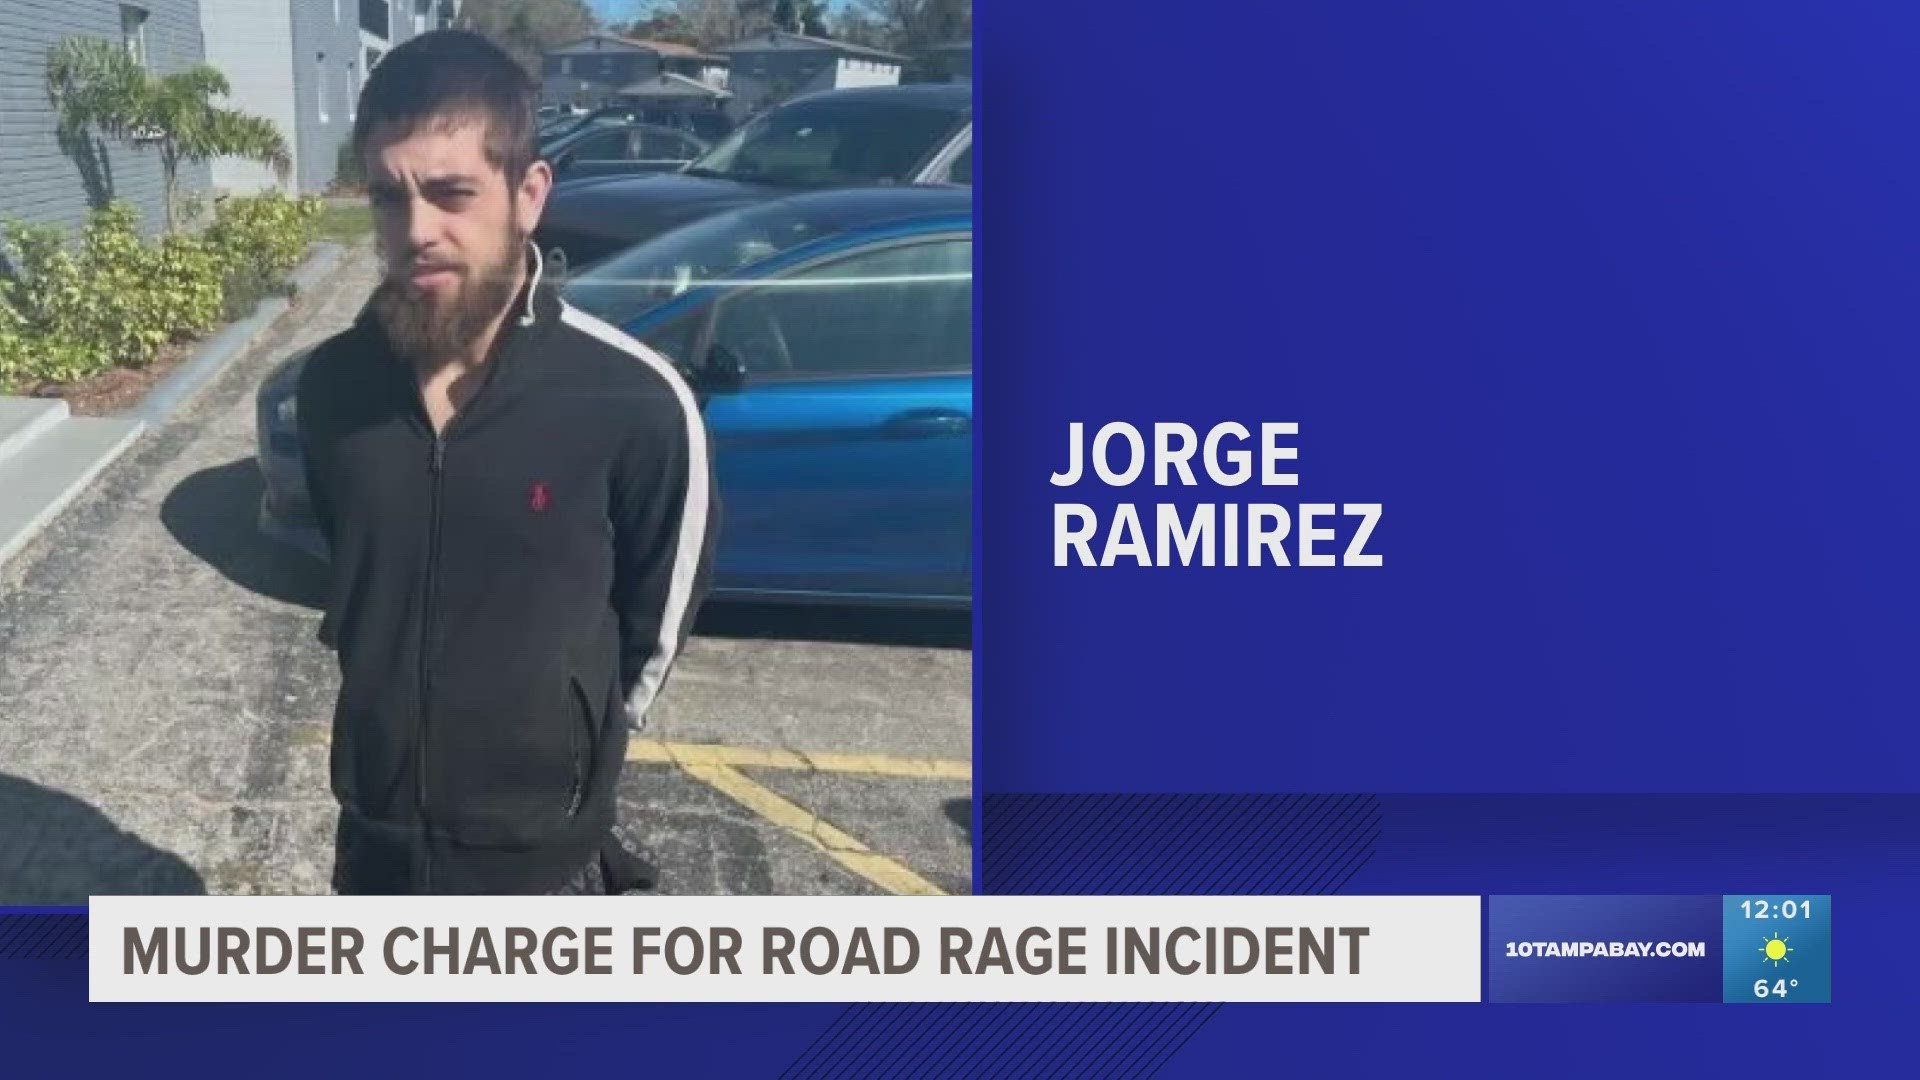 Deputies charged 20-year-old Jorge Ramirez for killing Bryan Proenza in a road rage incident in January.